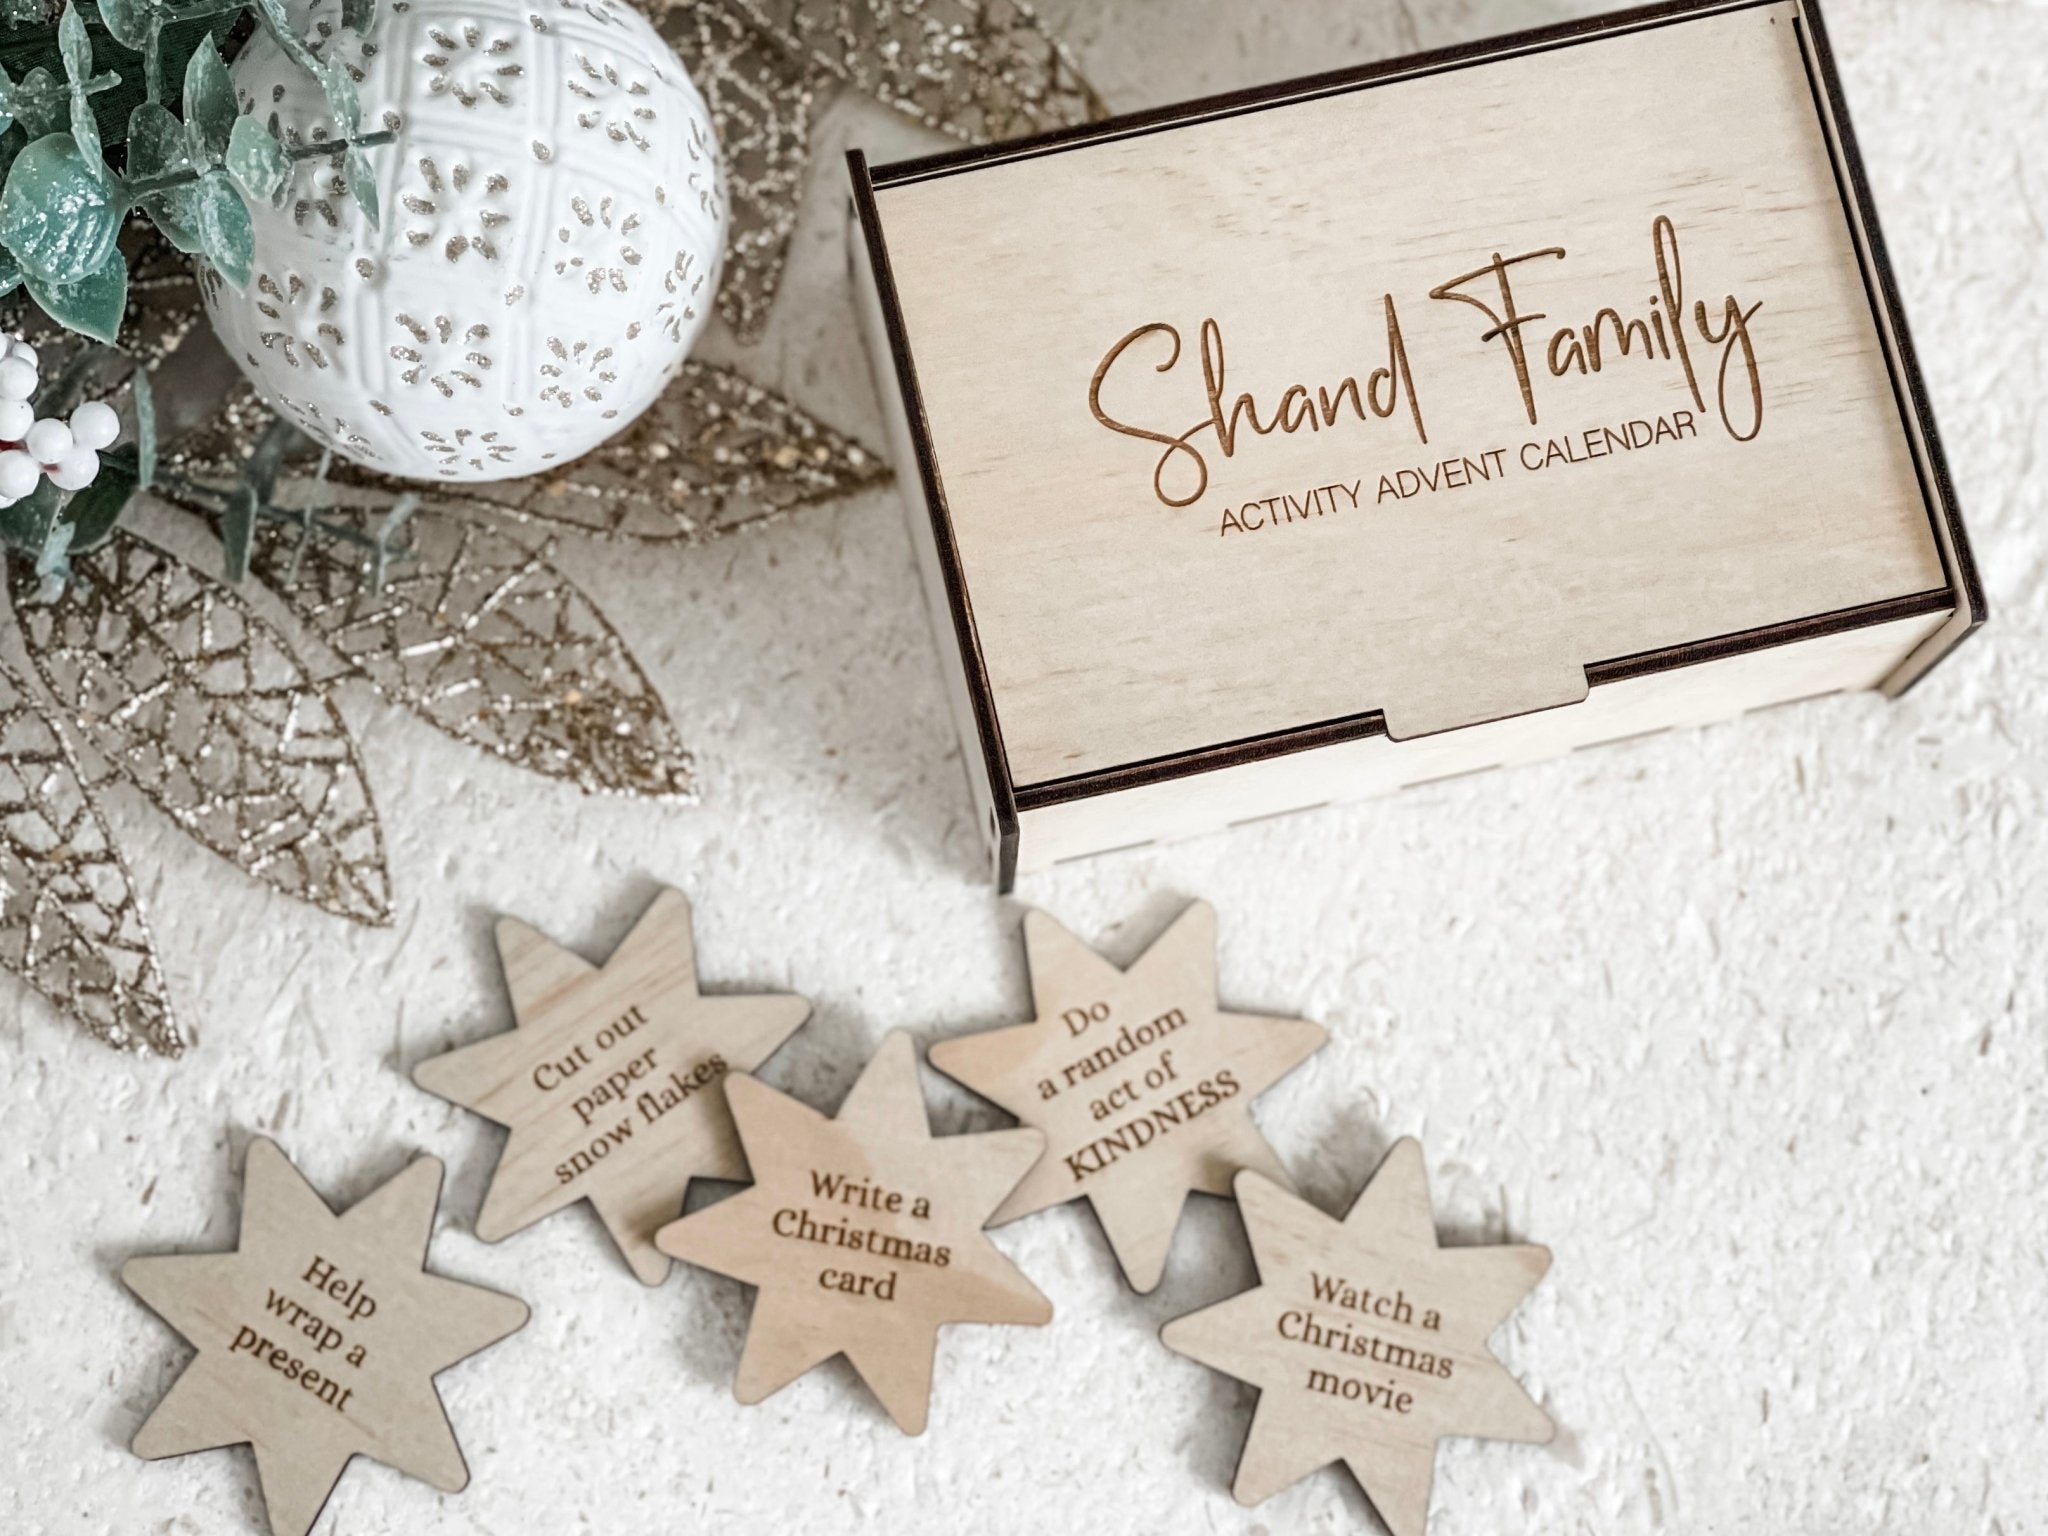 Family Activity Advent Calendar - The Humble Gift Co.